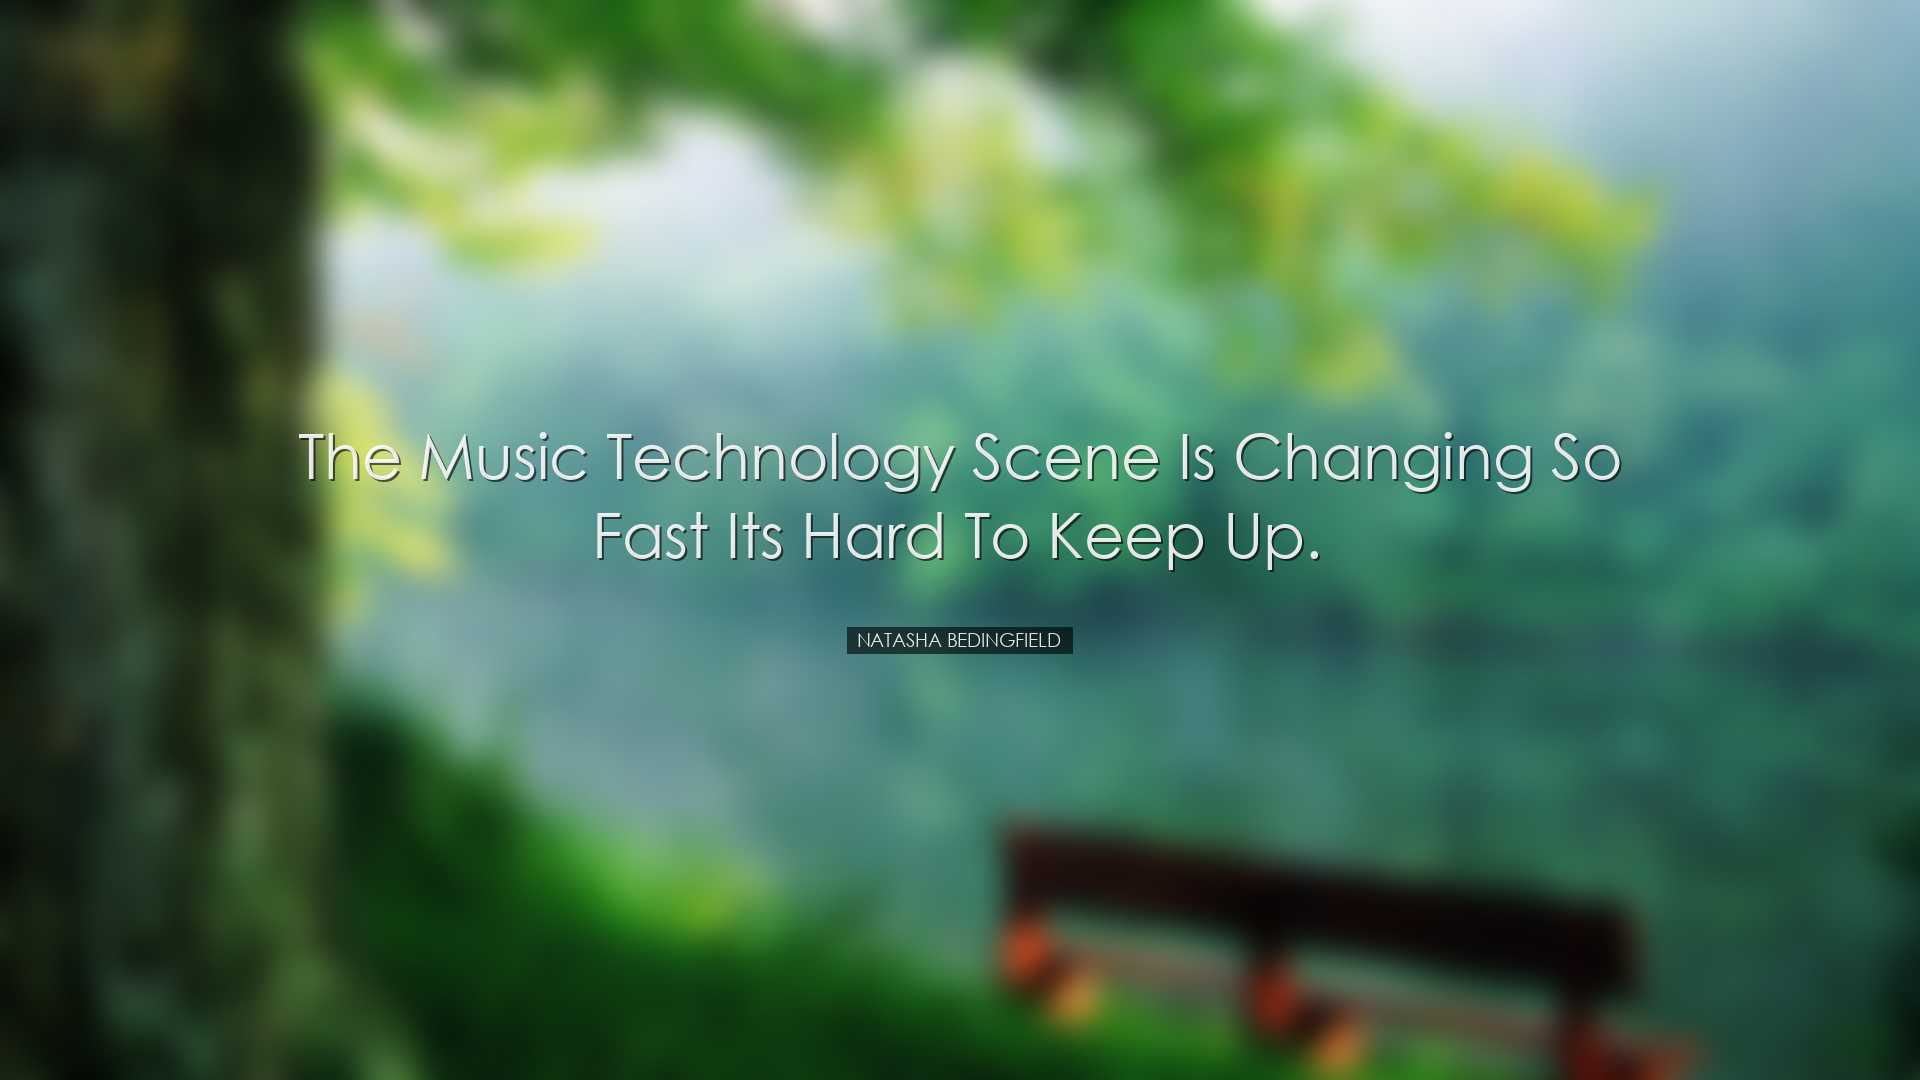 The music technology scene is changing so fast its hard to keep up